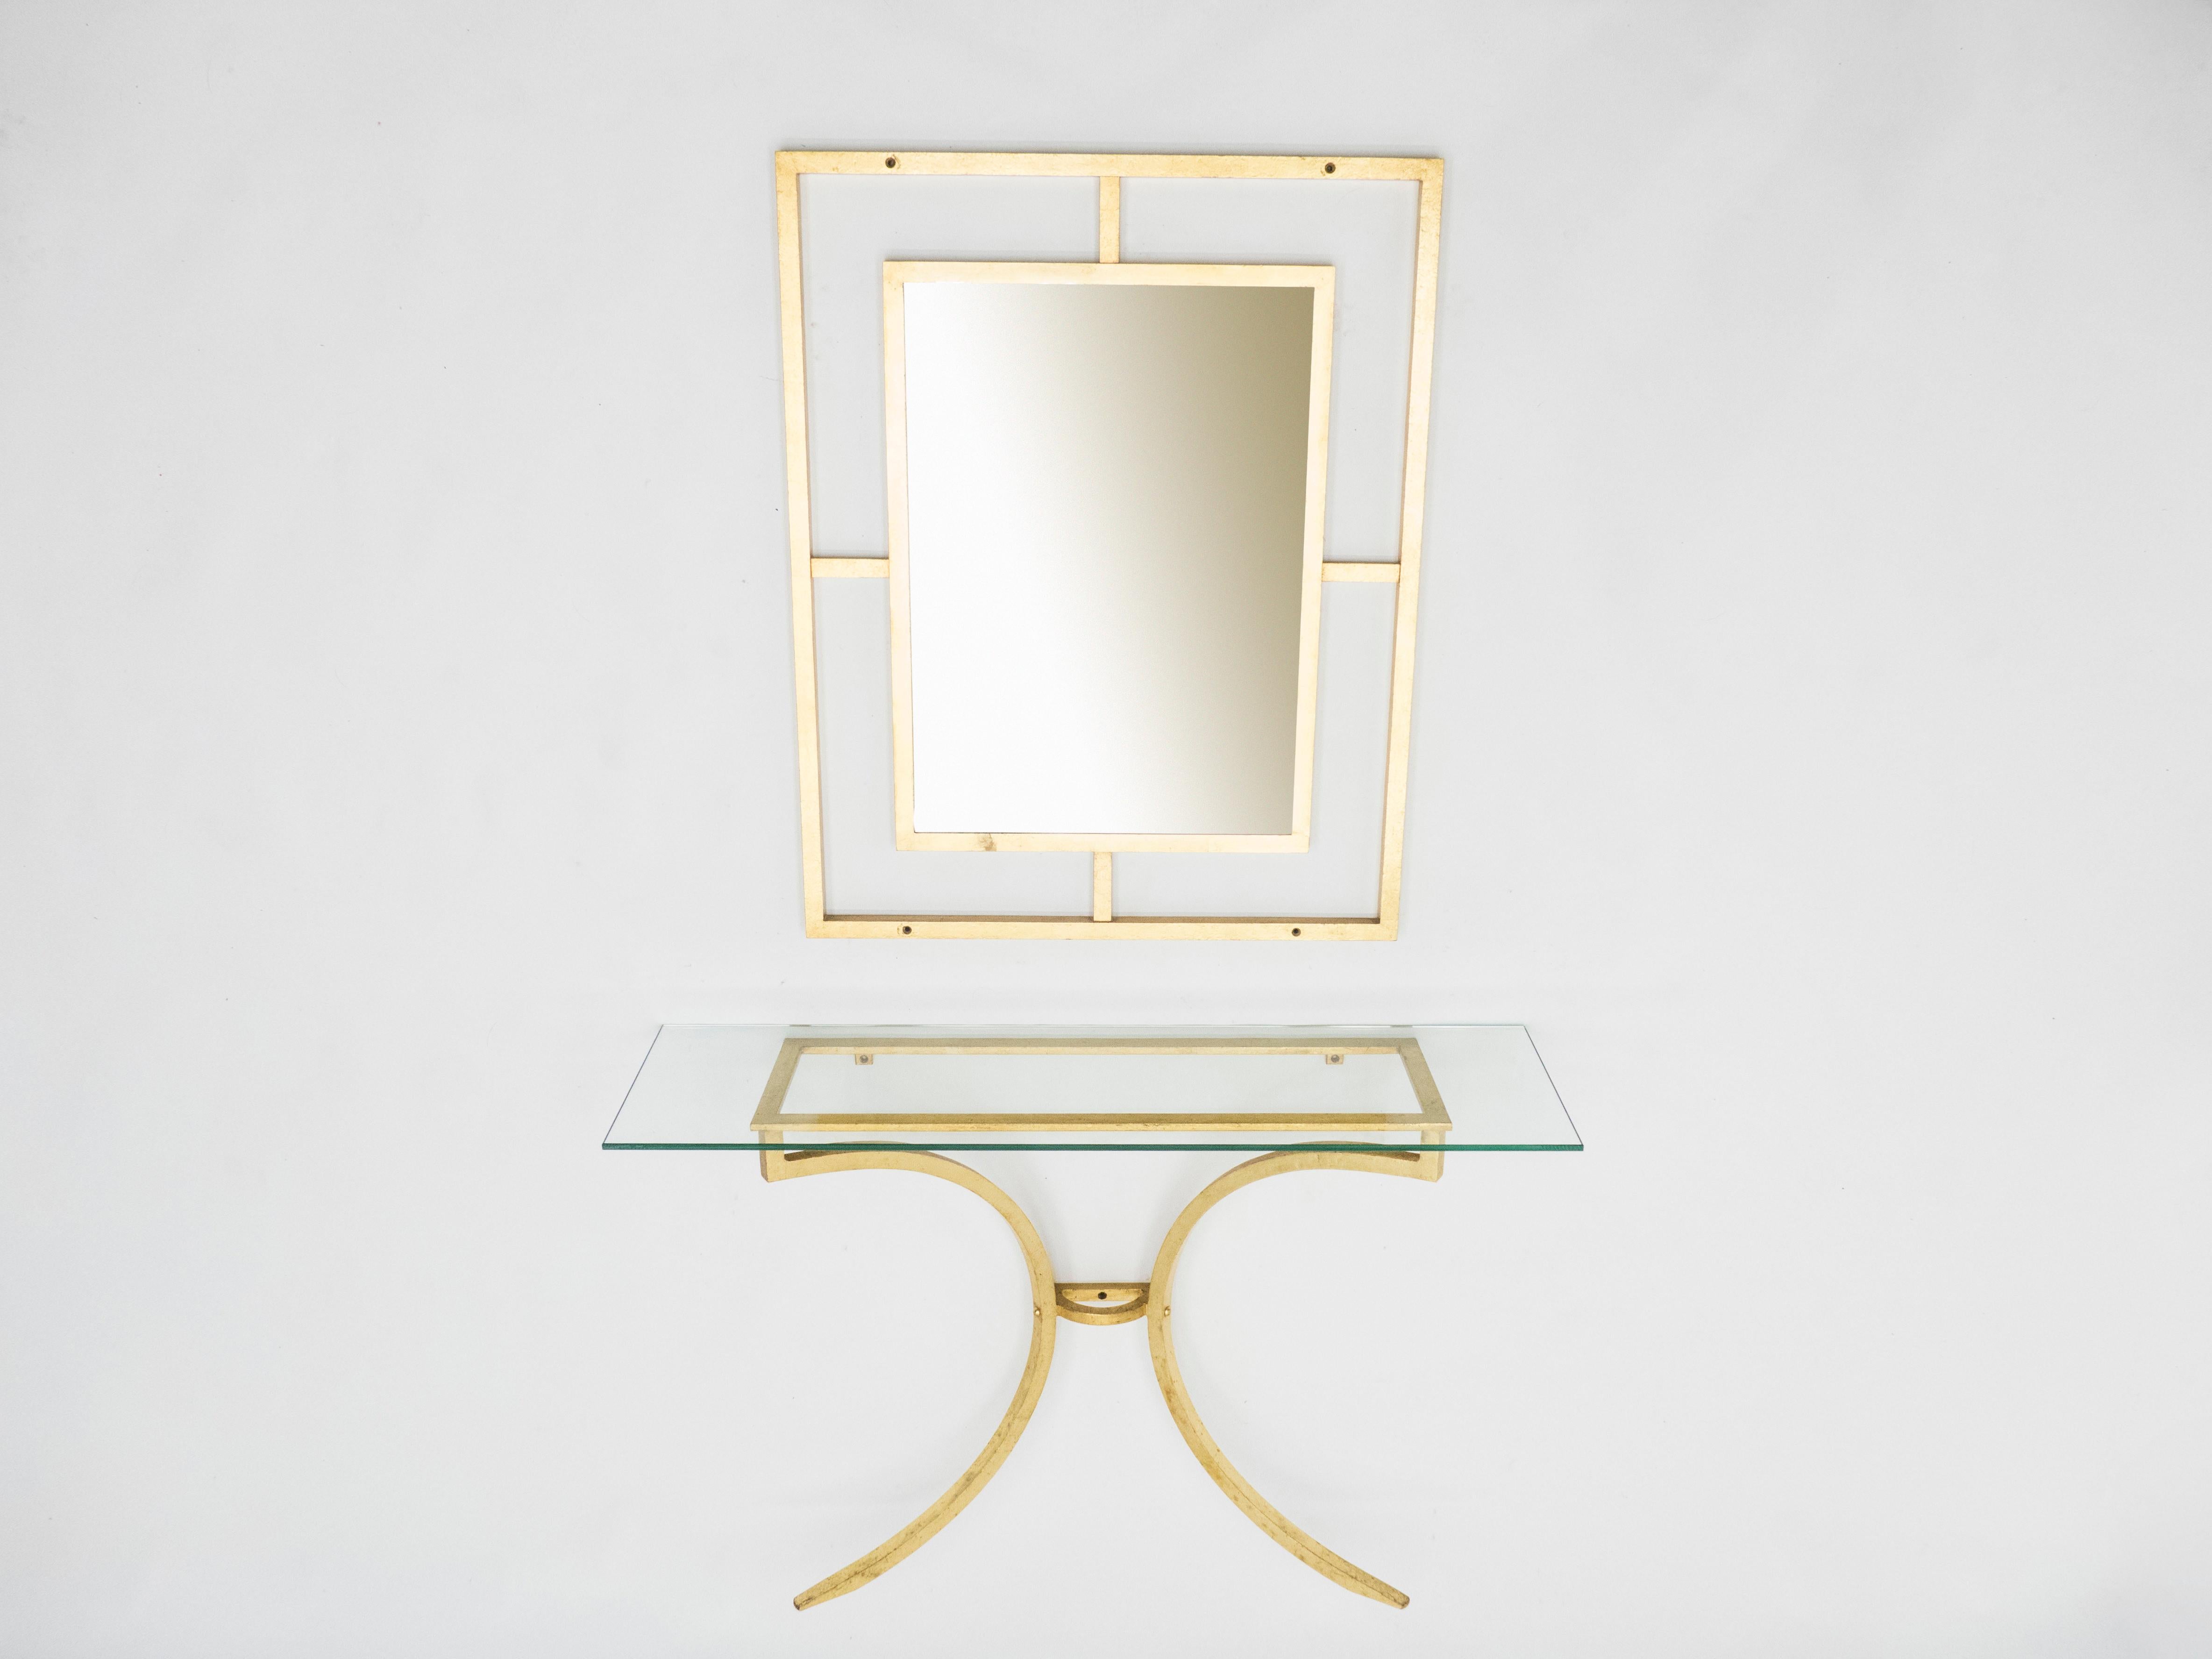 A strategically sparse design with high quality materials gives this rare console with its matching mirror all its appeal. Wrought iron has been gilded with gold leaf for a gentle warm golden patina throughout the entire structure, including all the